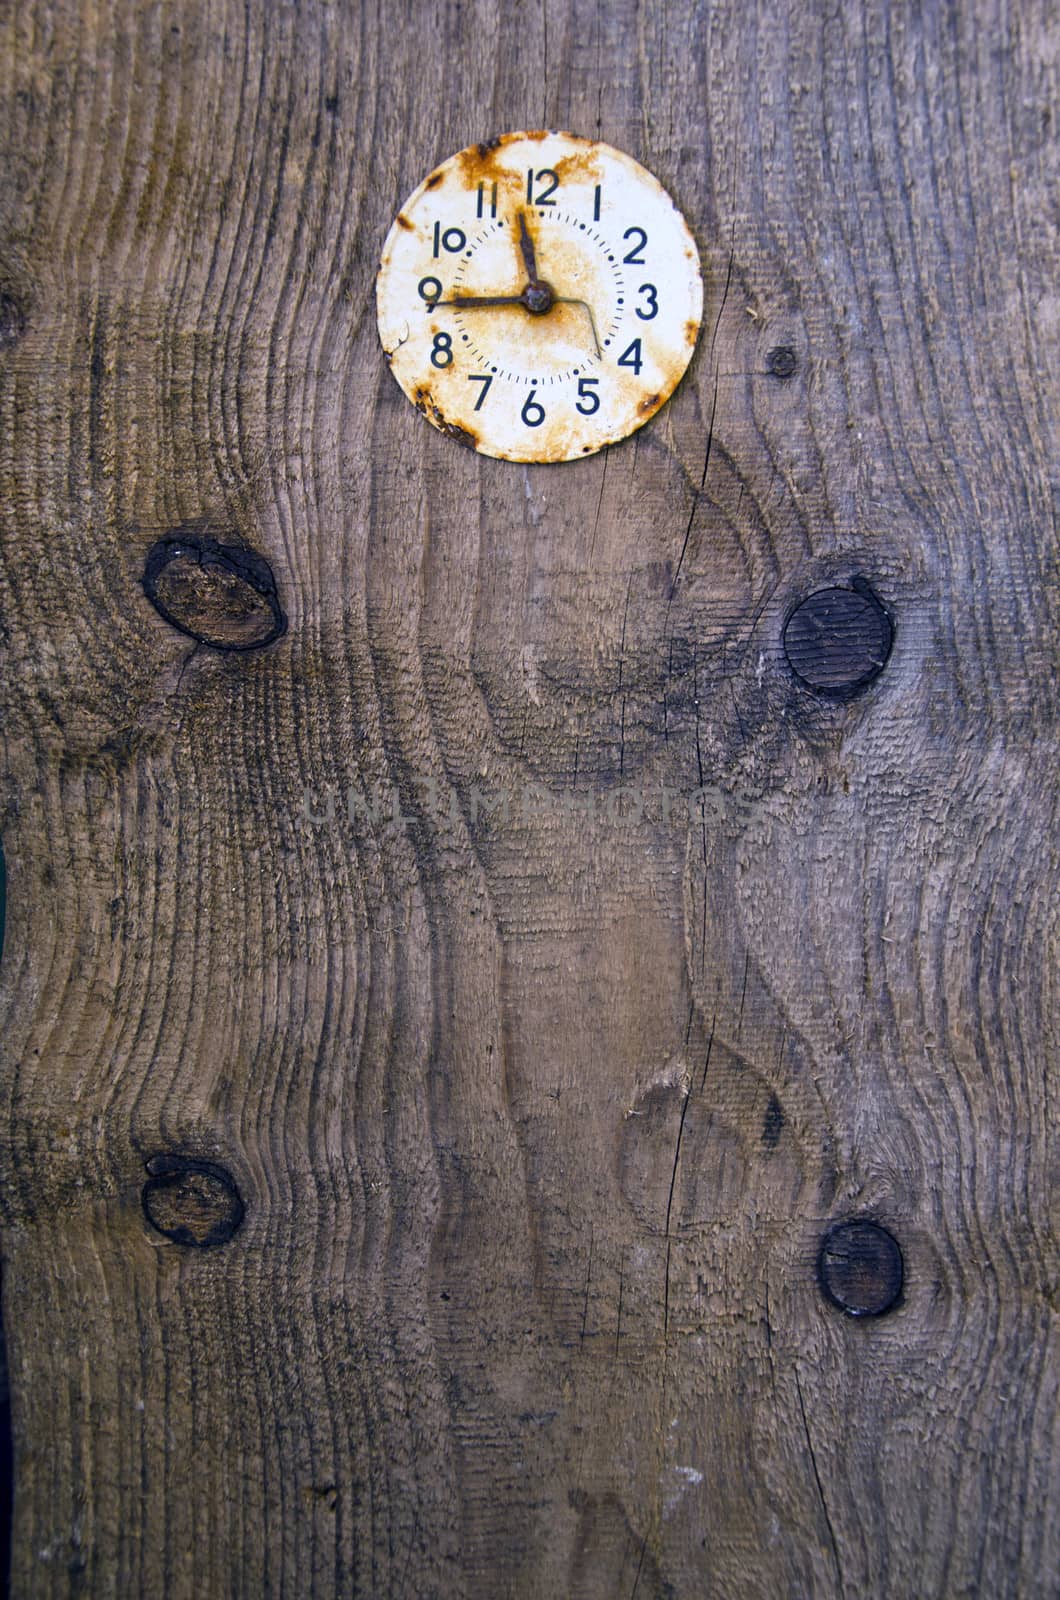 old wooden plank background with ancient clock face